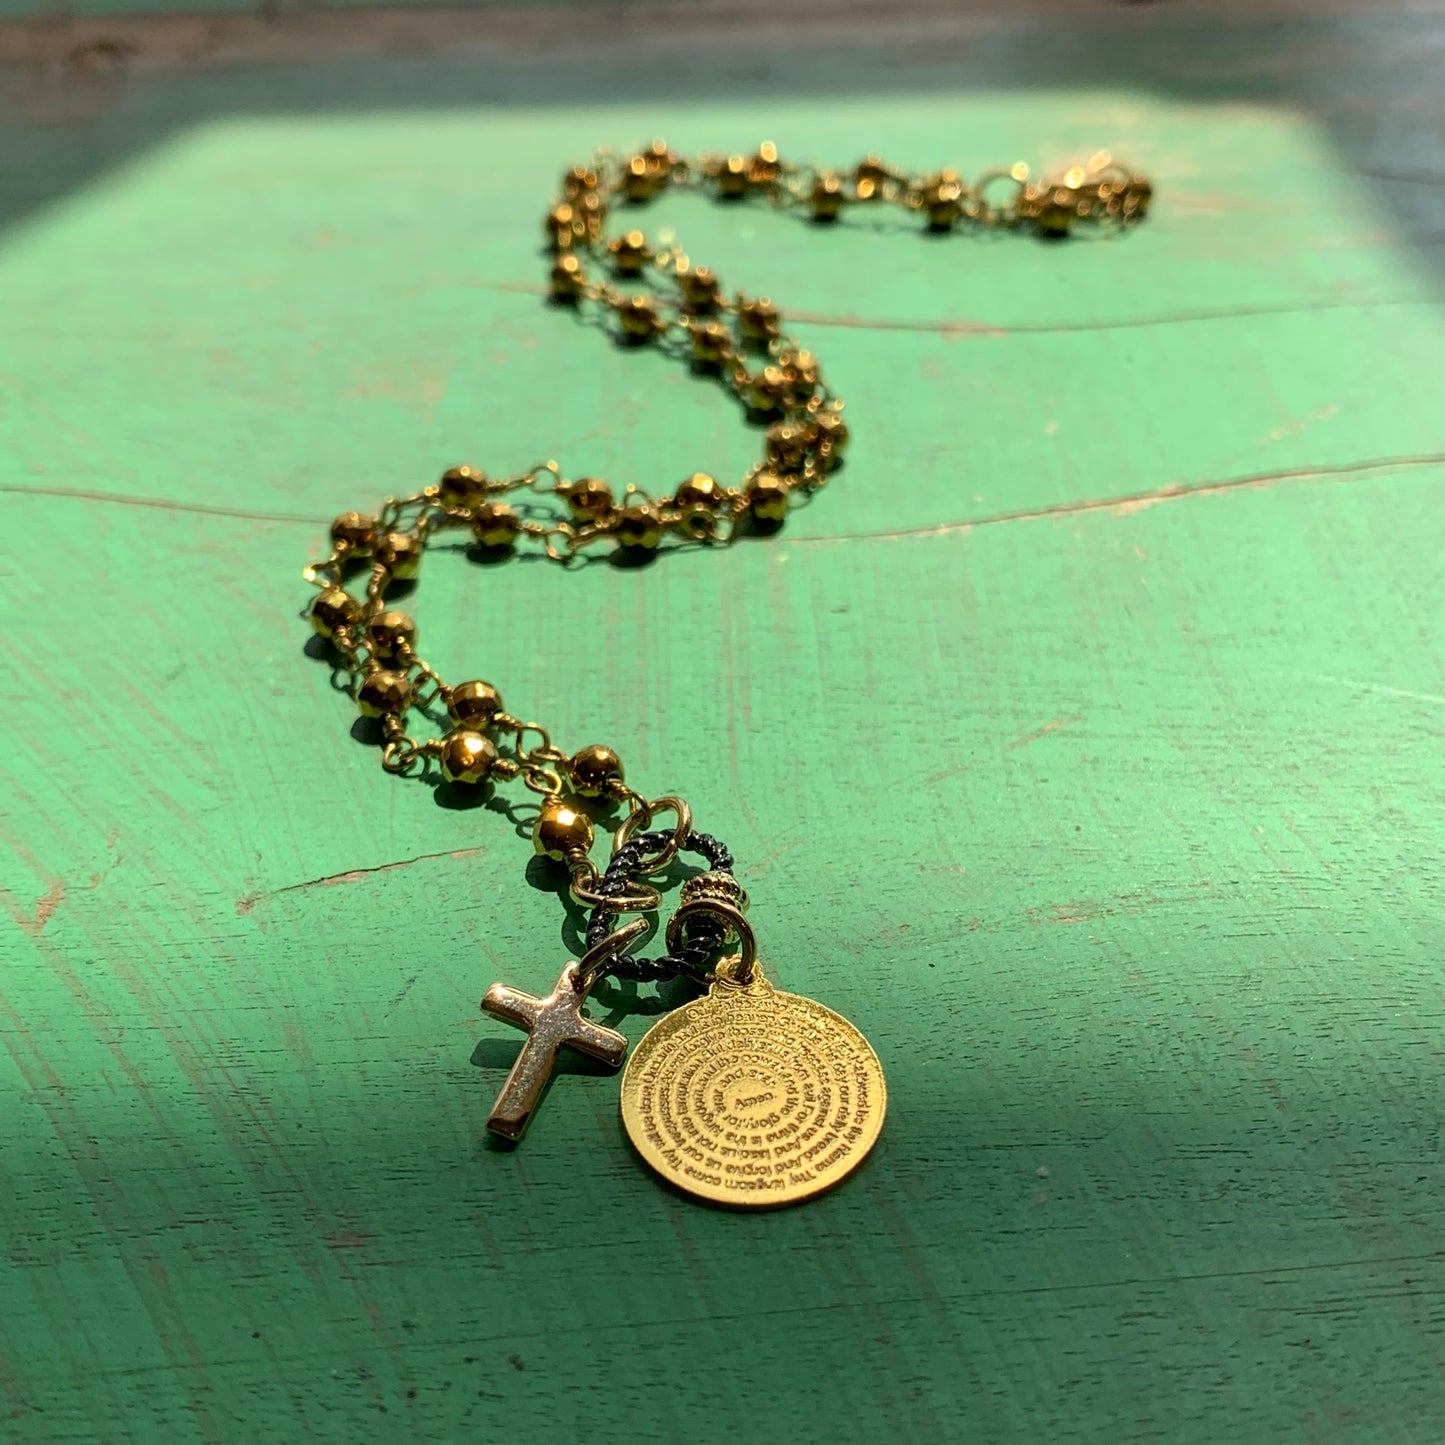 Our Father Prayer Necklace and Earrings